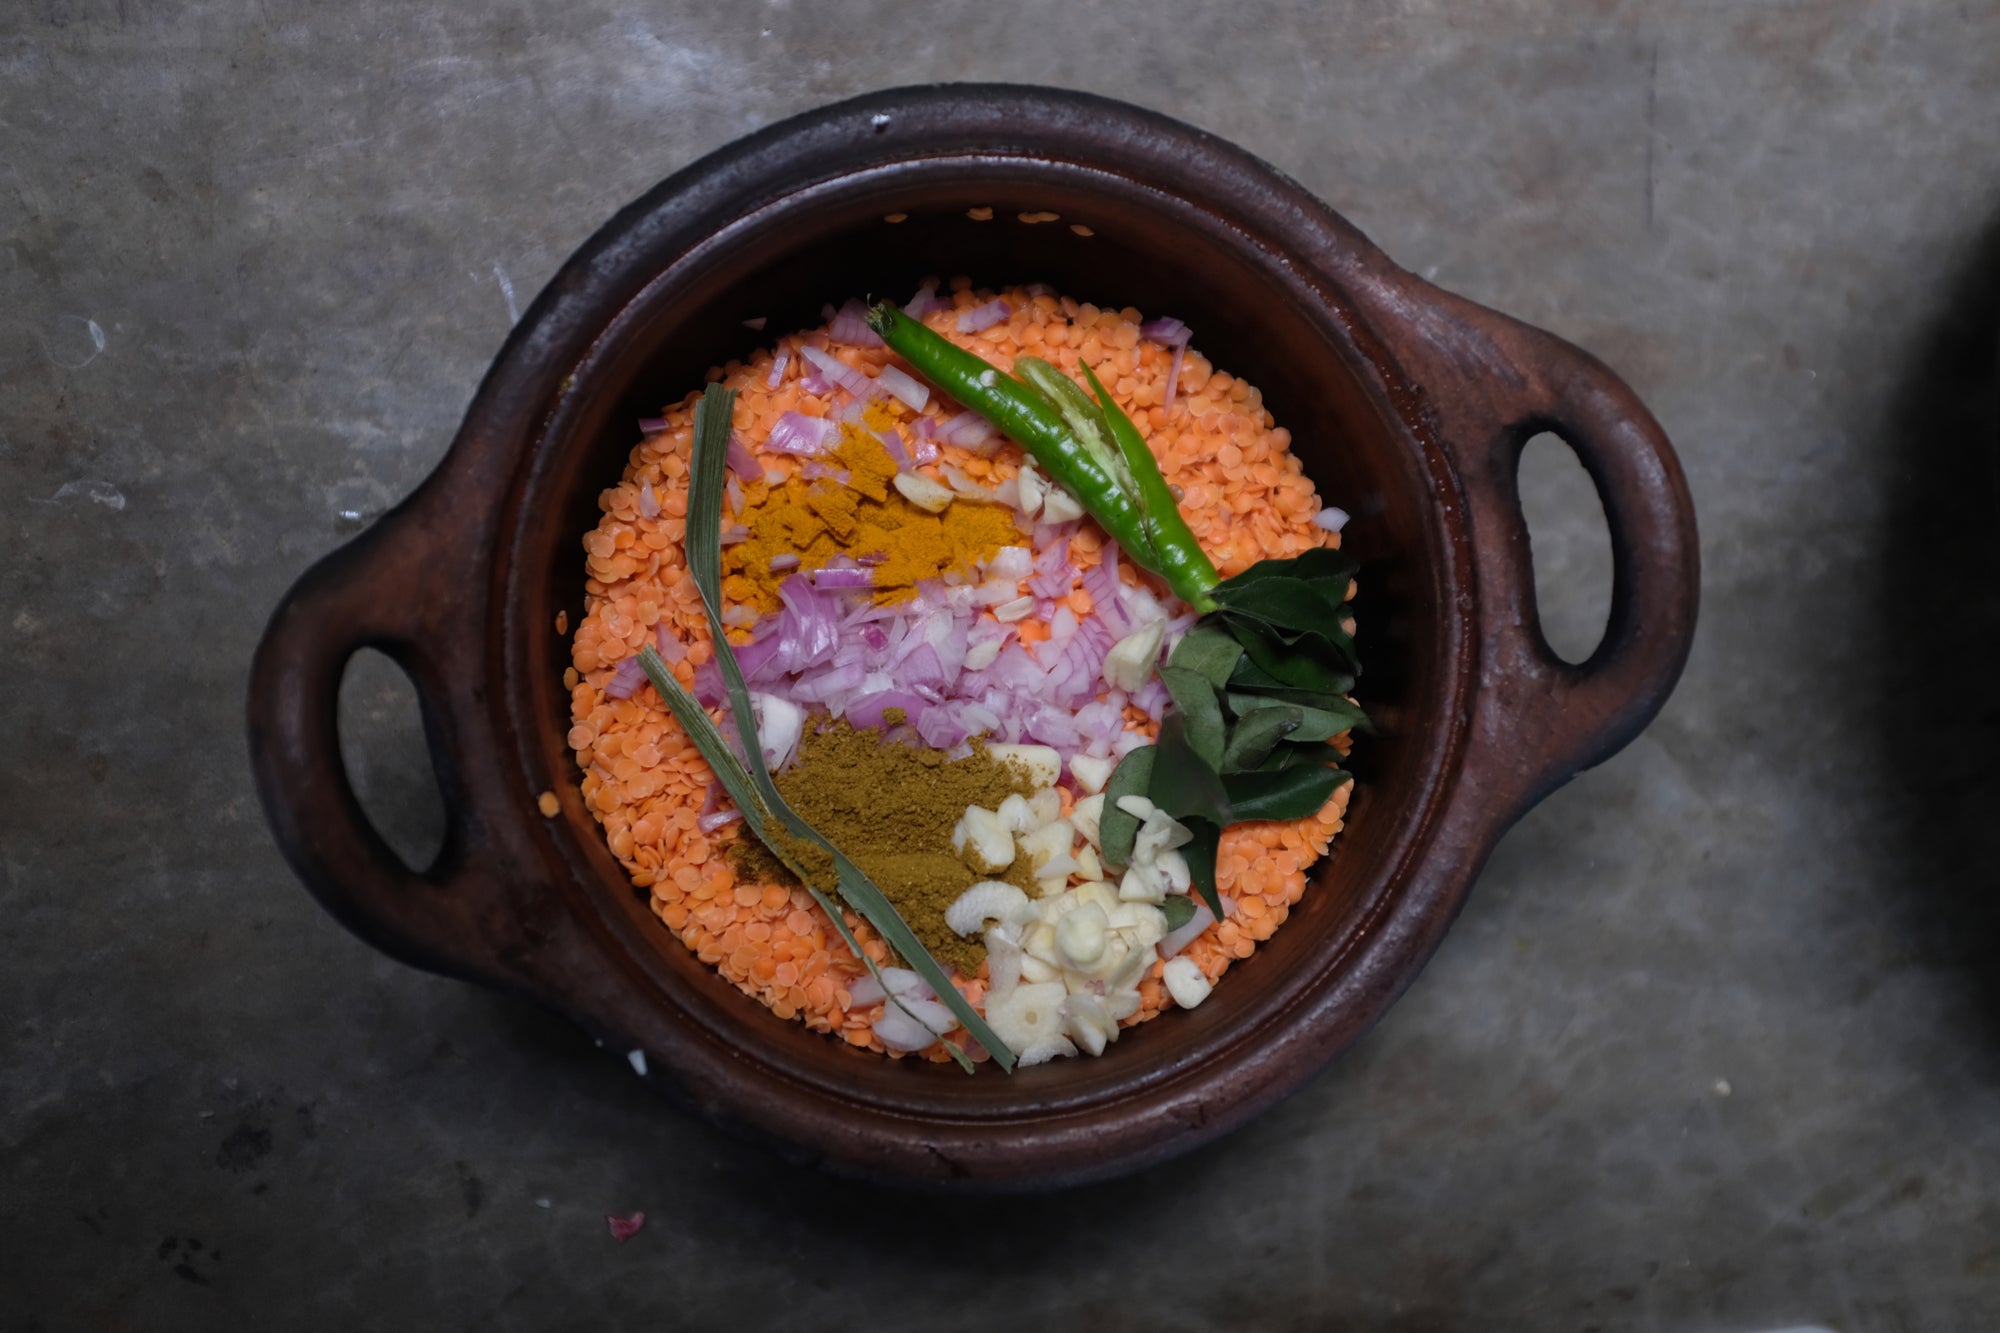 A simple, flavorful dhal from Kandy